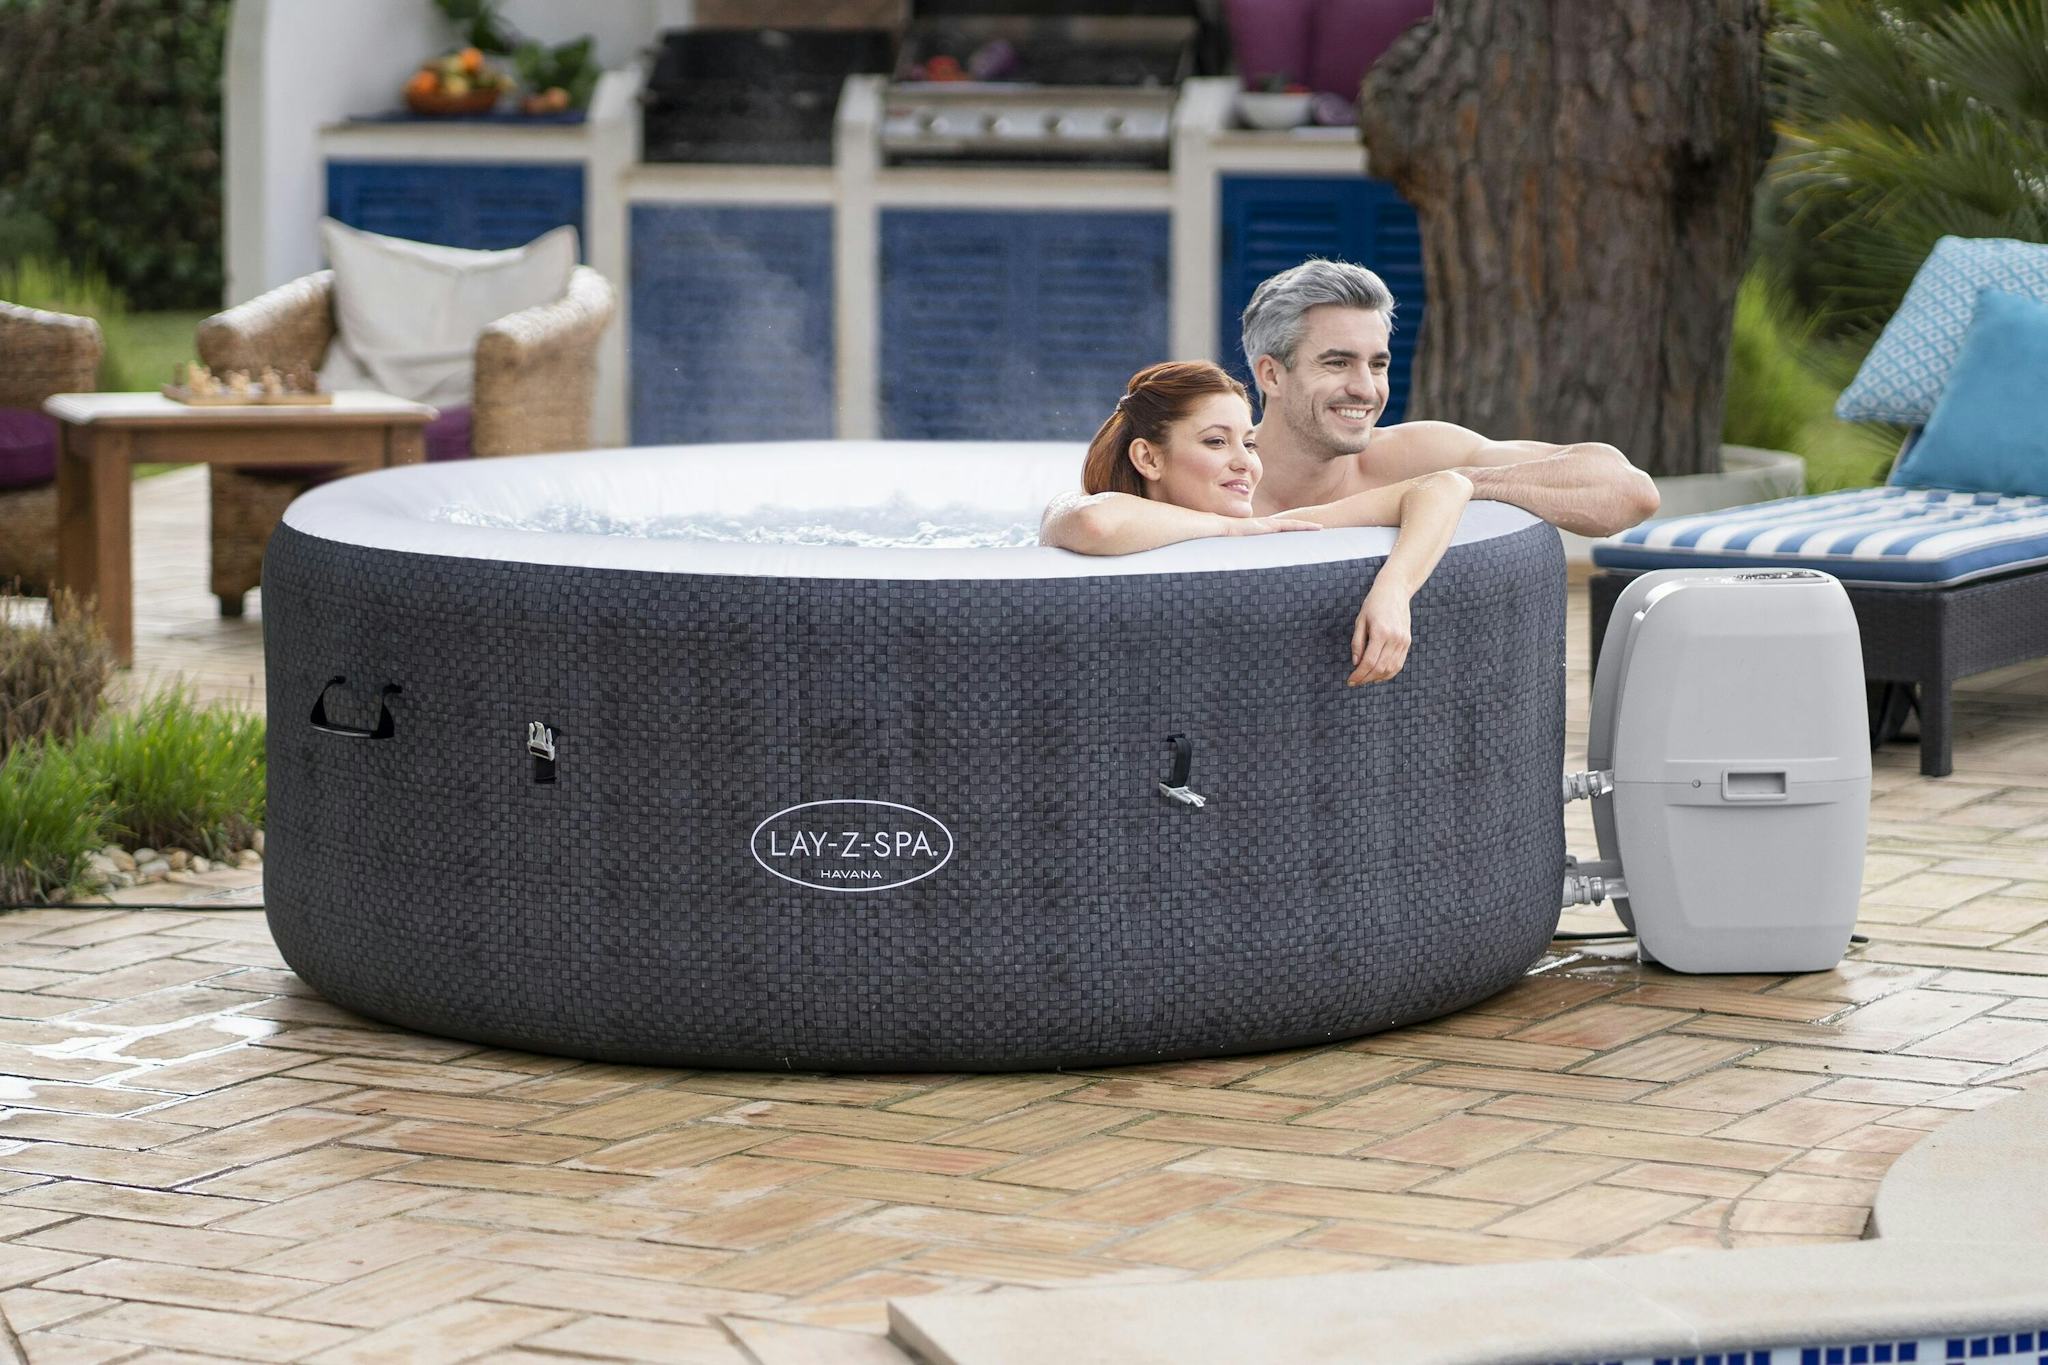 Spas Gonflables Spa gonflable rond Lay-Z-Spa Havana Airjet™ 2 - 4 personnes Bestway 15